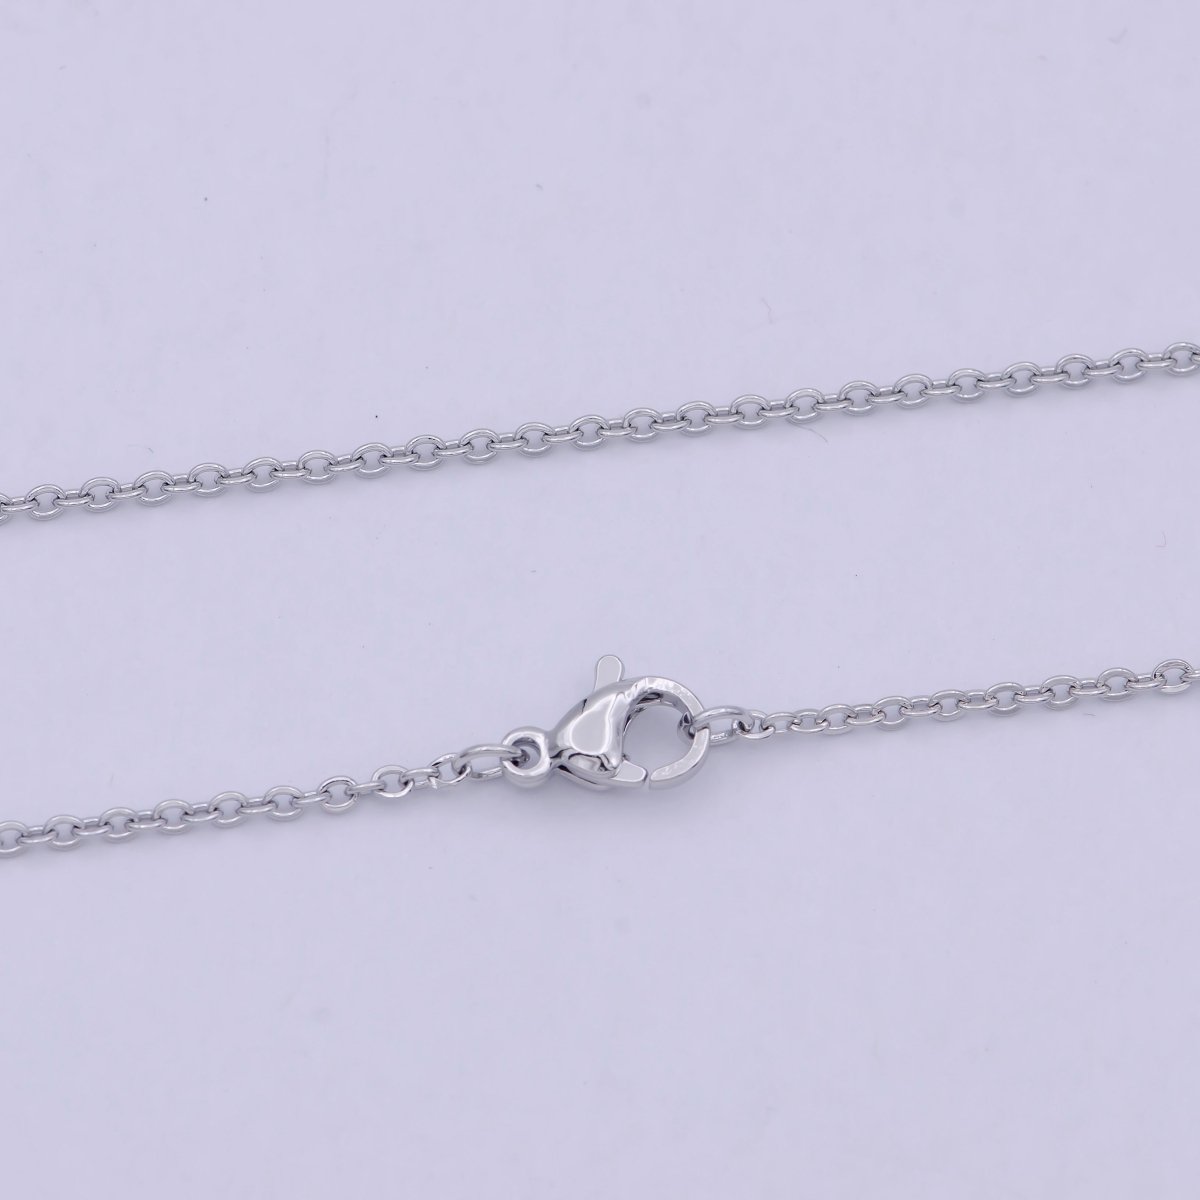 Dainty silver chain finished chain everyday chain, simple silver chain ready to wear 18.5 INCH | WA-794 Clearance Pricing - DLUXCA